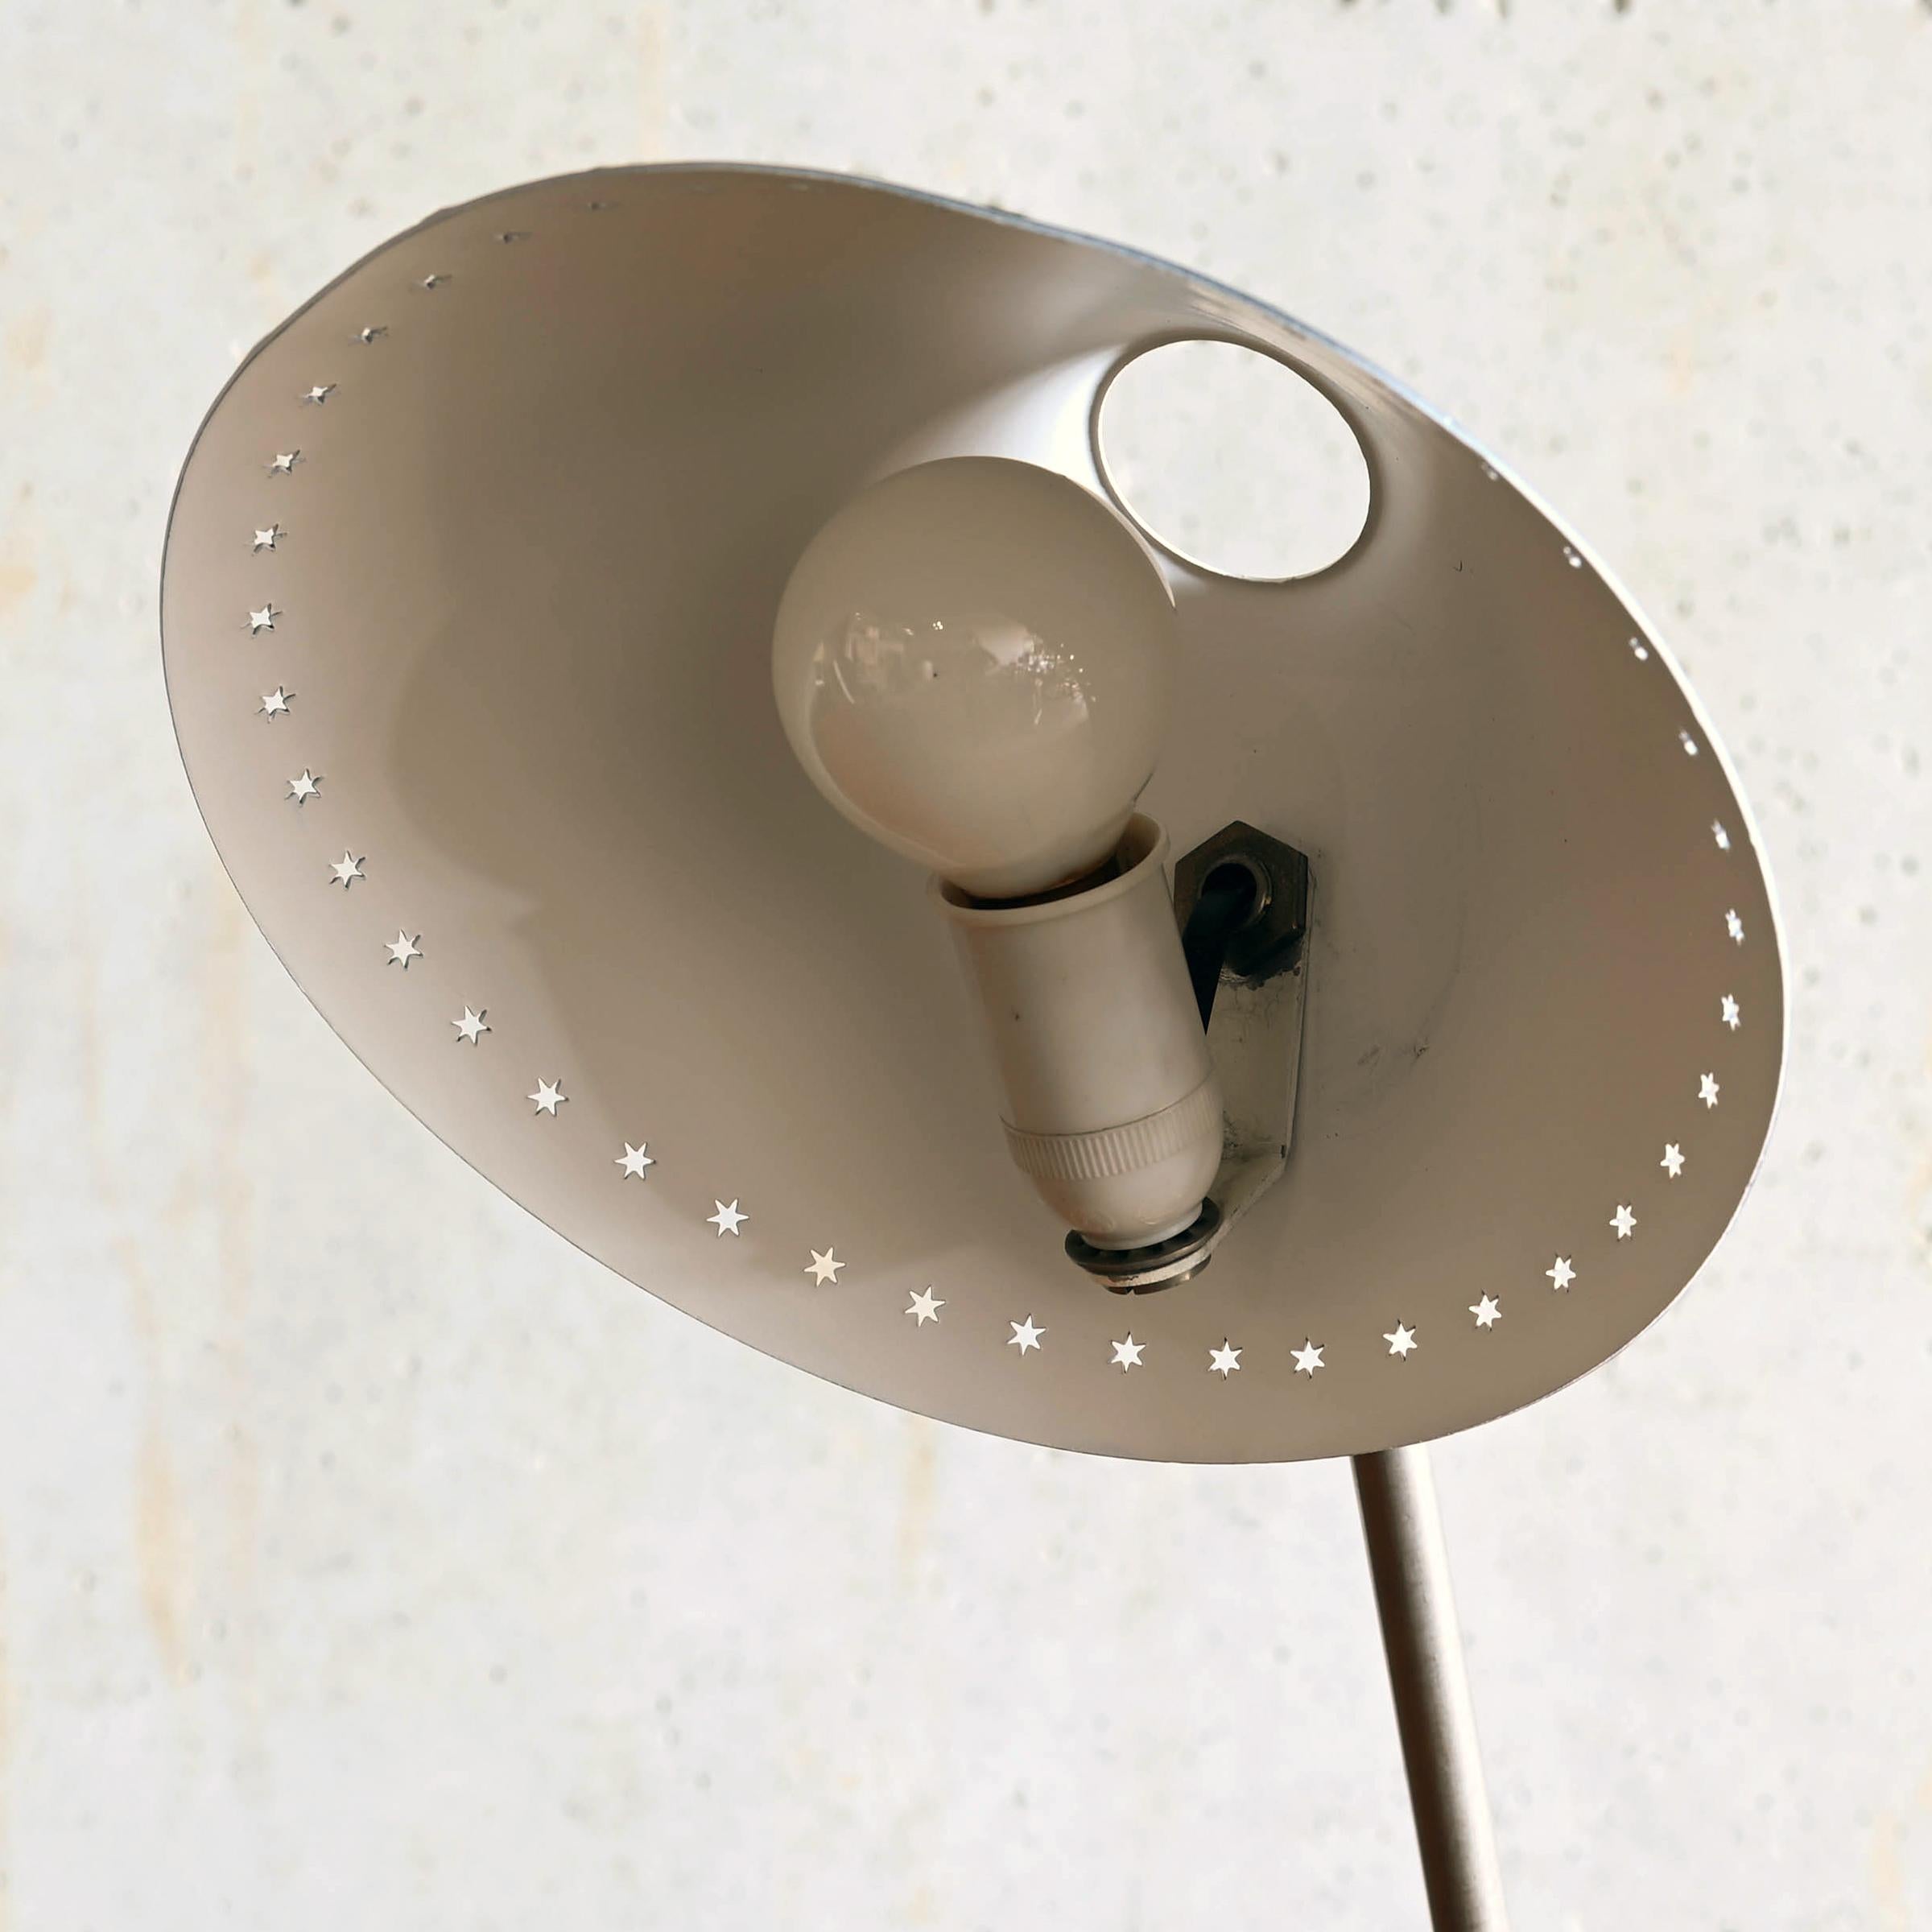 Pinocchio Lamp with black shade by H. Busquet for Hala Zeist, Netherlands For Sale 1